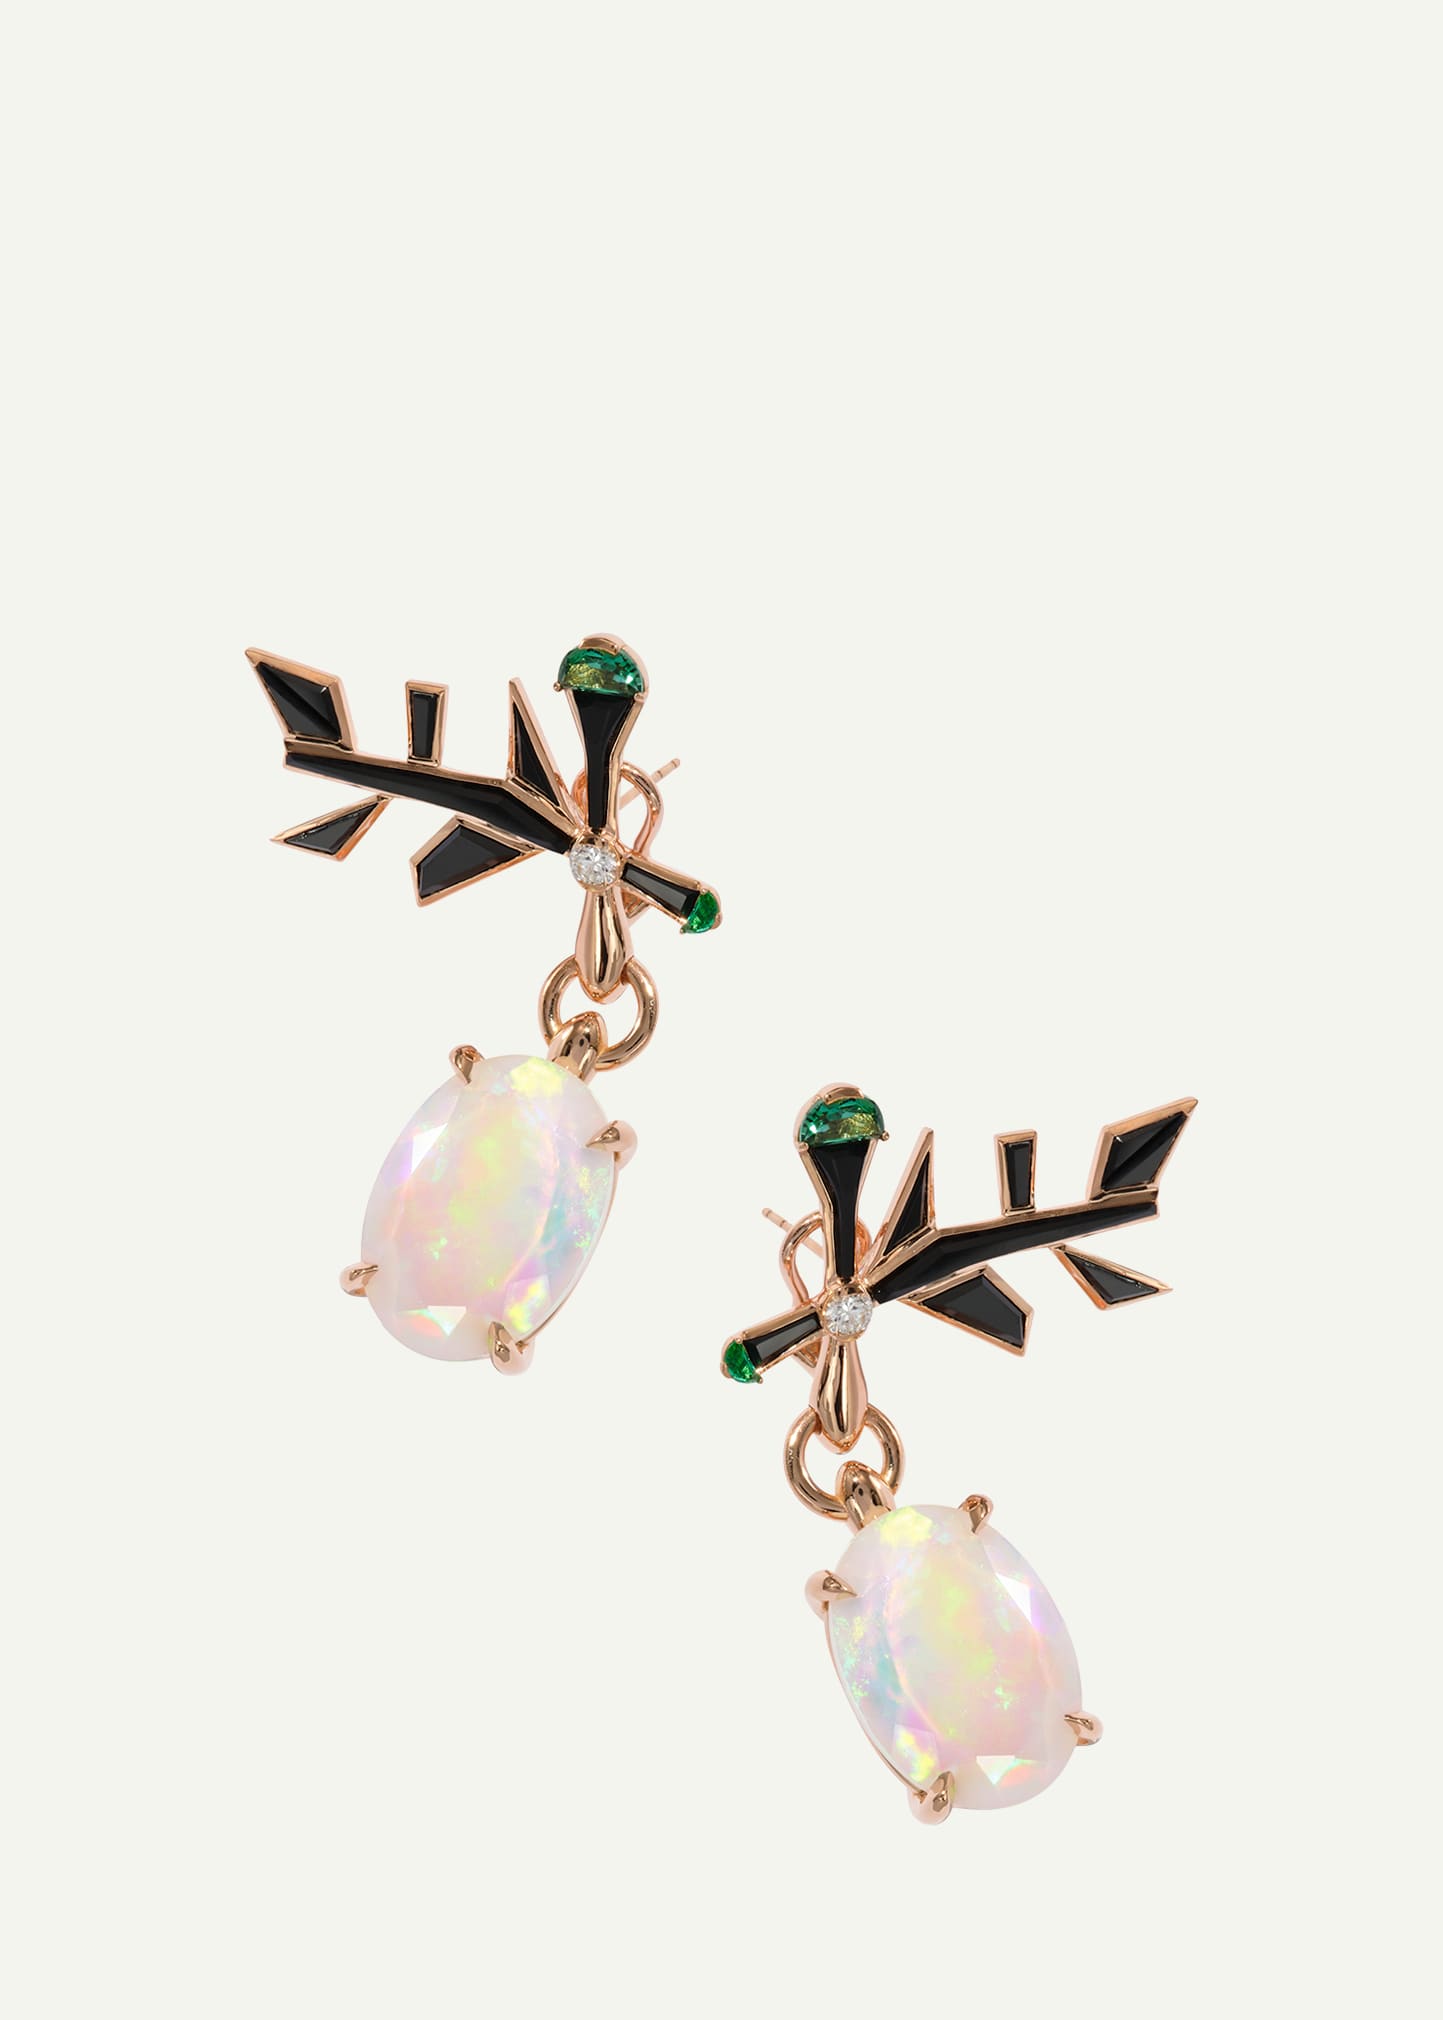 20K Rose Gold Giogo Earrings with Ethiopian Opal, Black Spinel, Blue Tourmaline, Emeralds and Diamonds